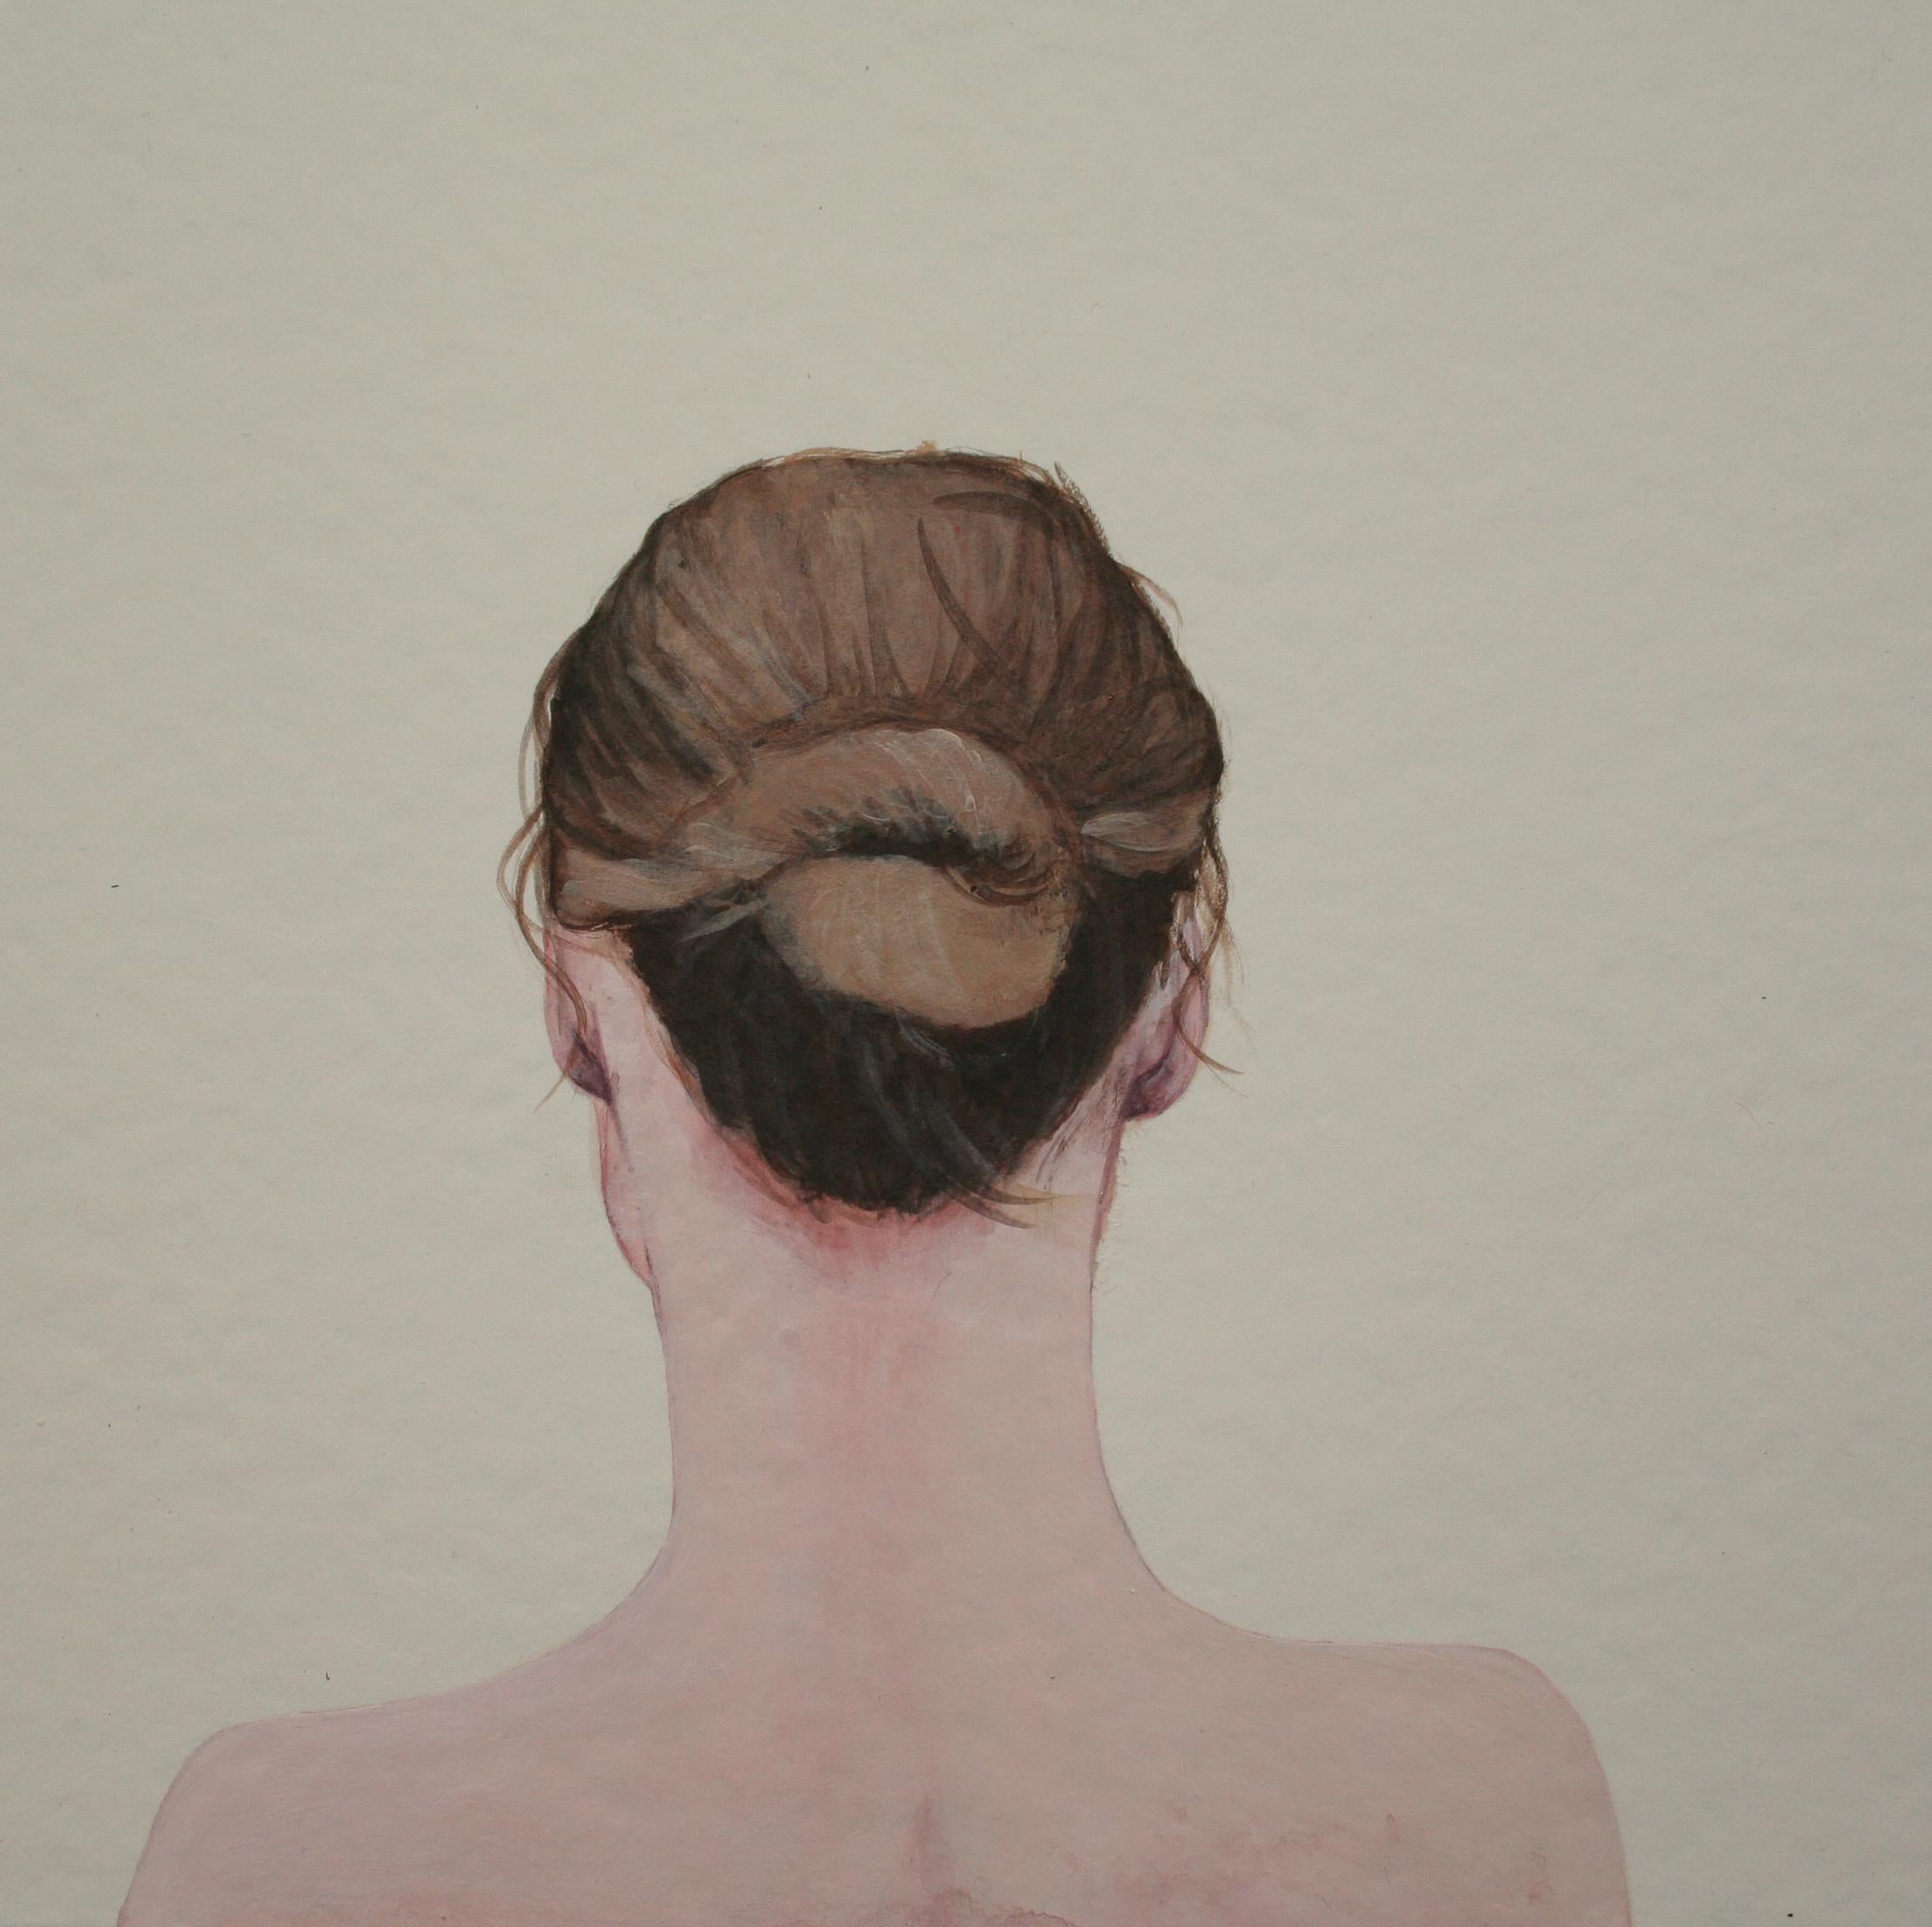 Karoline Kroiss Figurative Painting - "Young Female with Bun" Contemporary Portrait of a Girl with Bun